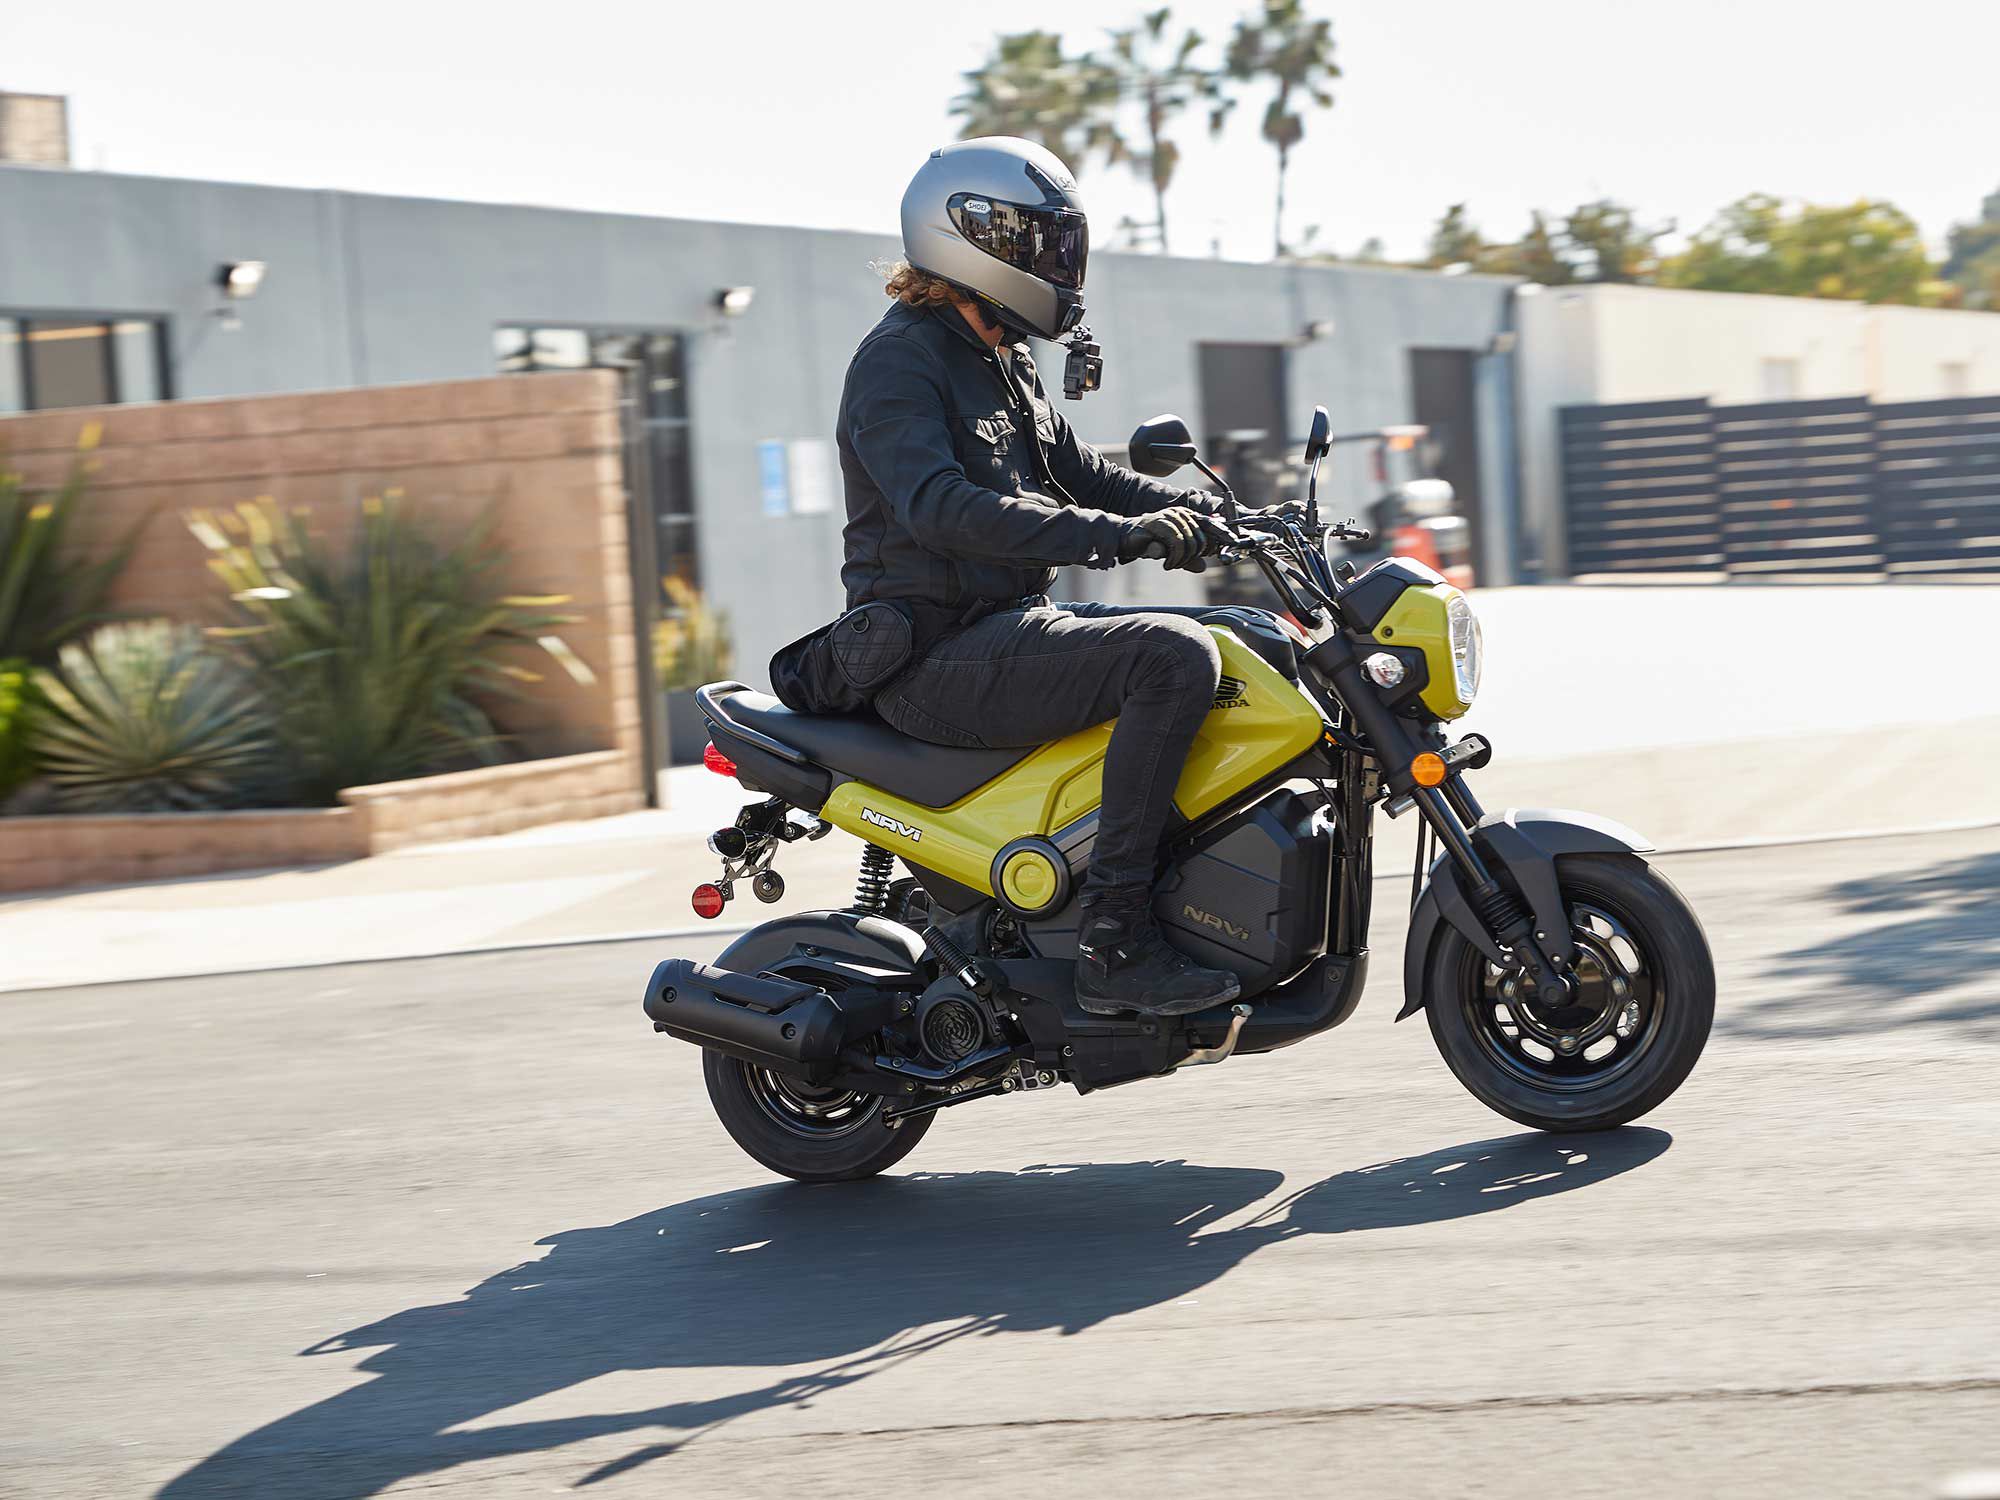 This conversation is over: $1,807 equals the answer to all of your Honda Navi questions.